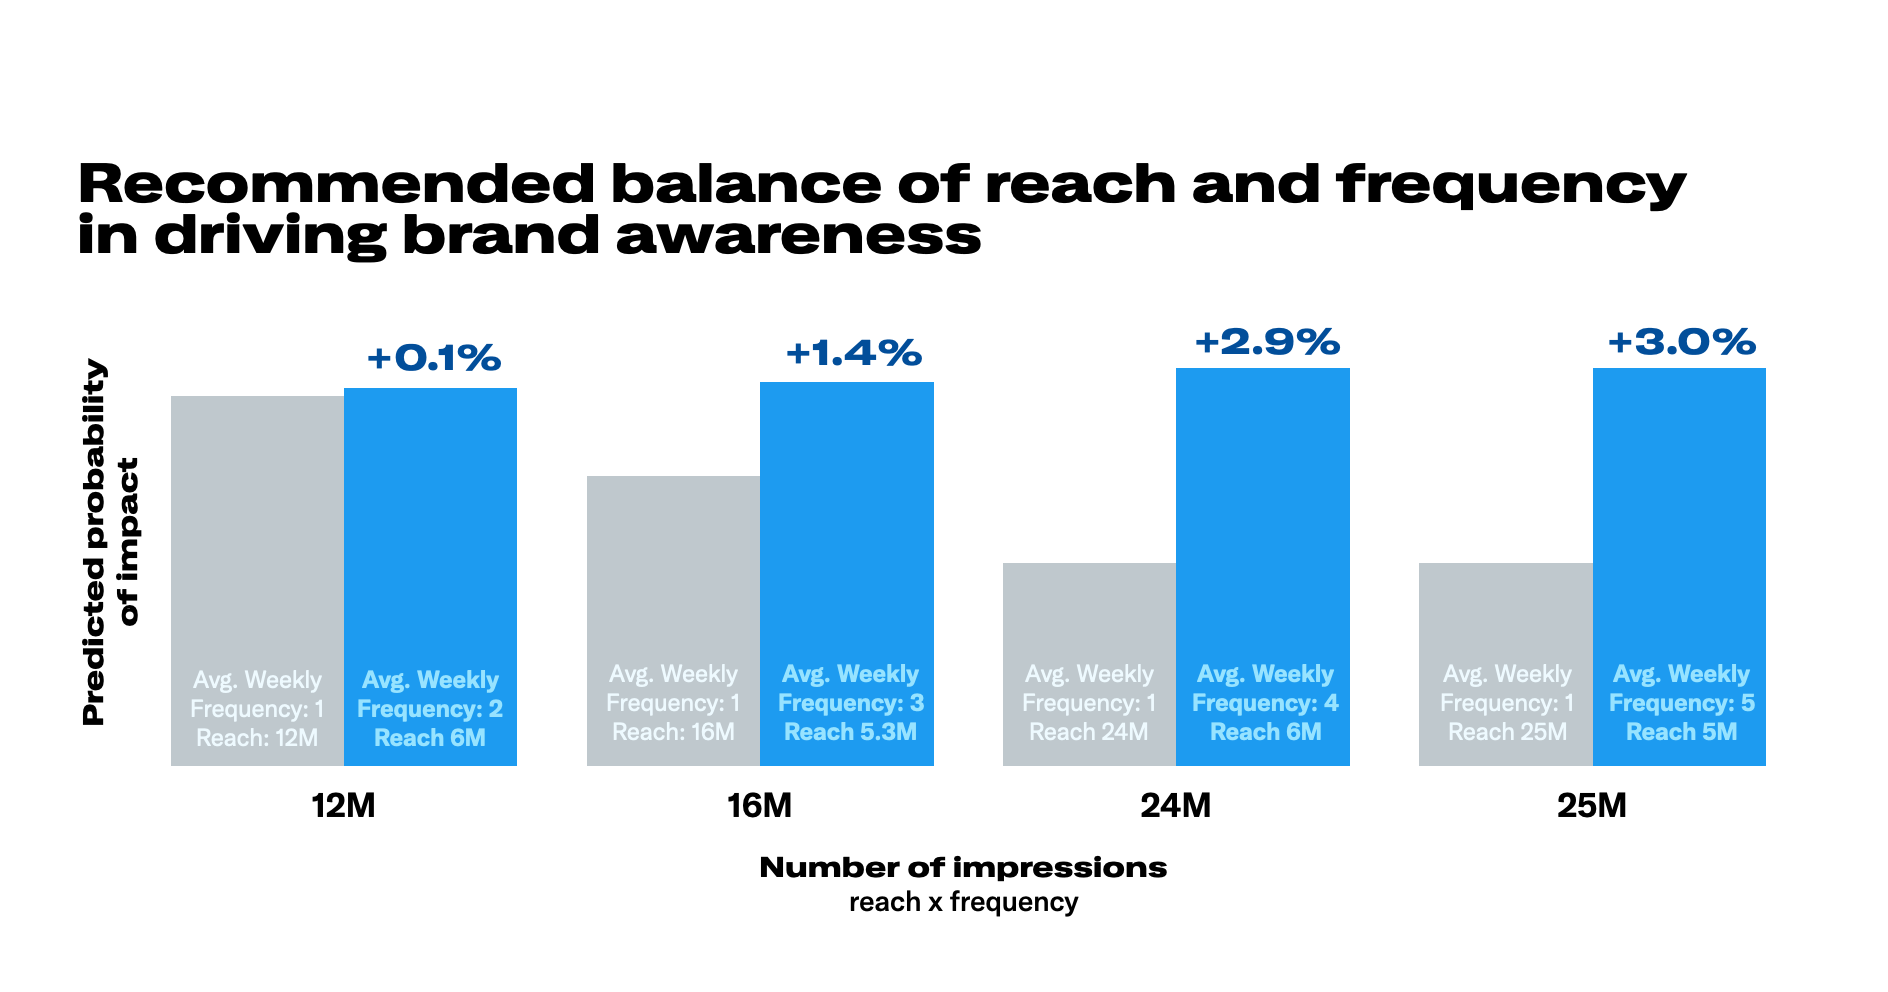 A bar chart showing the recommended balance of reach and frequency in driving brand awareness 